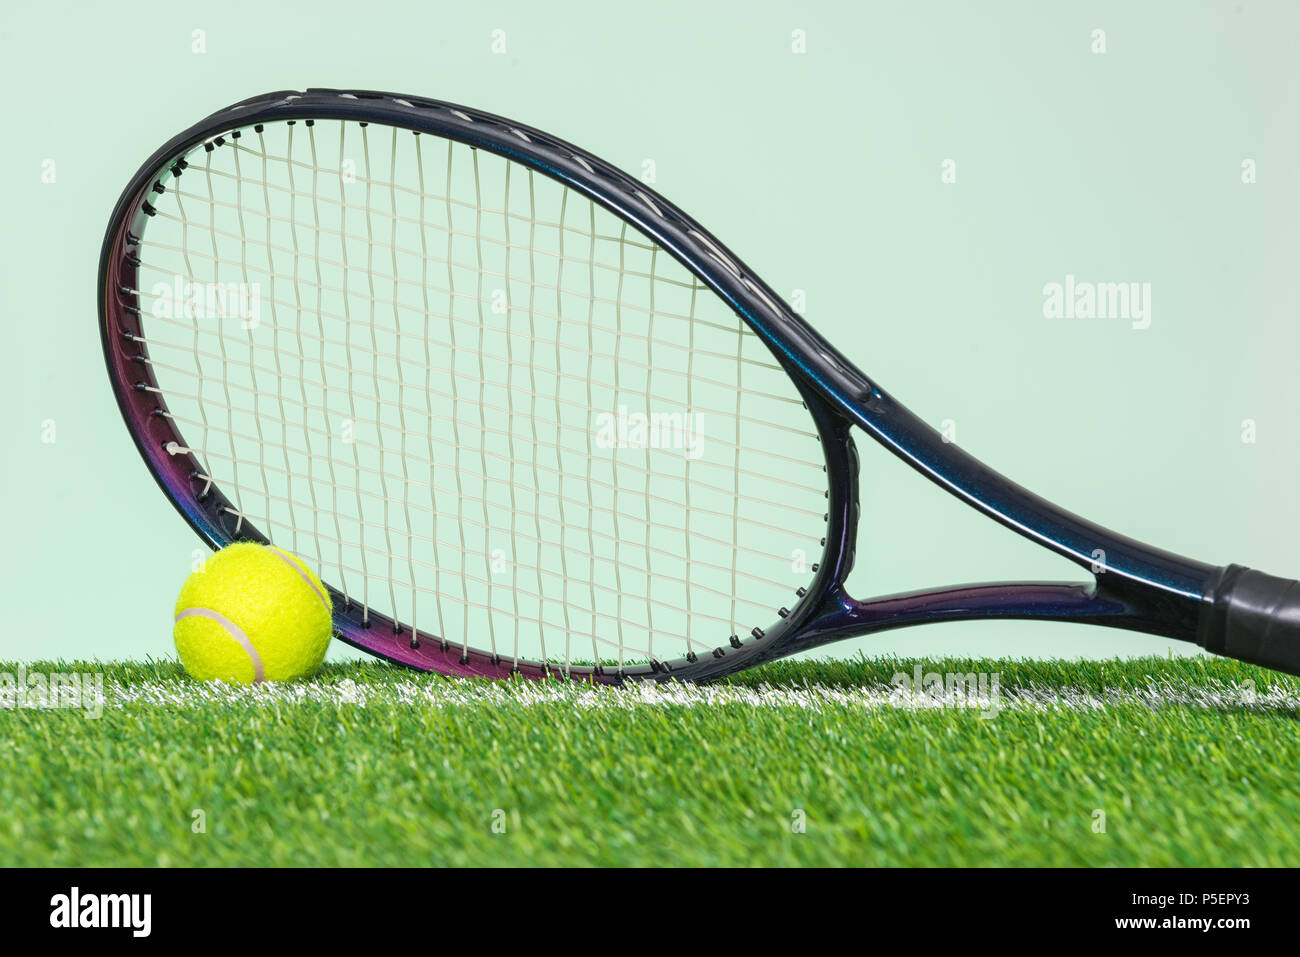 A tennis racket and ball on grass with plain green background. Stock Photo